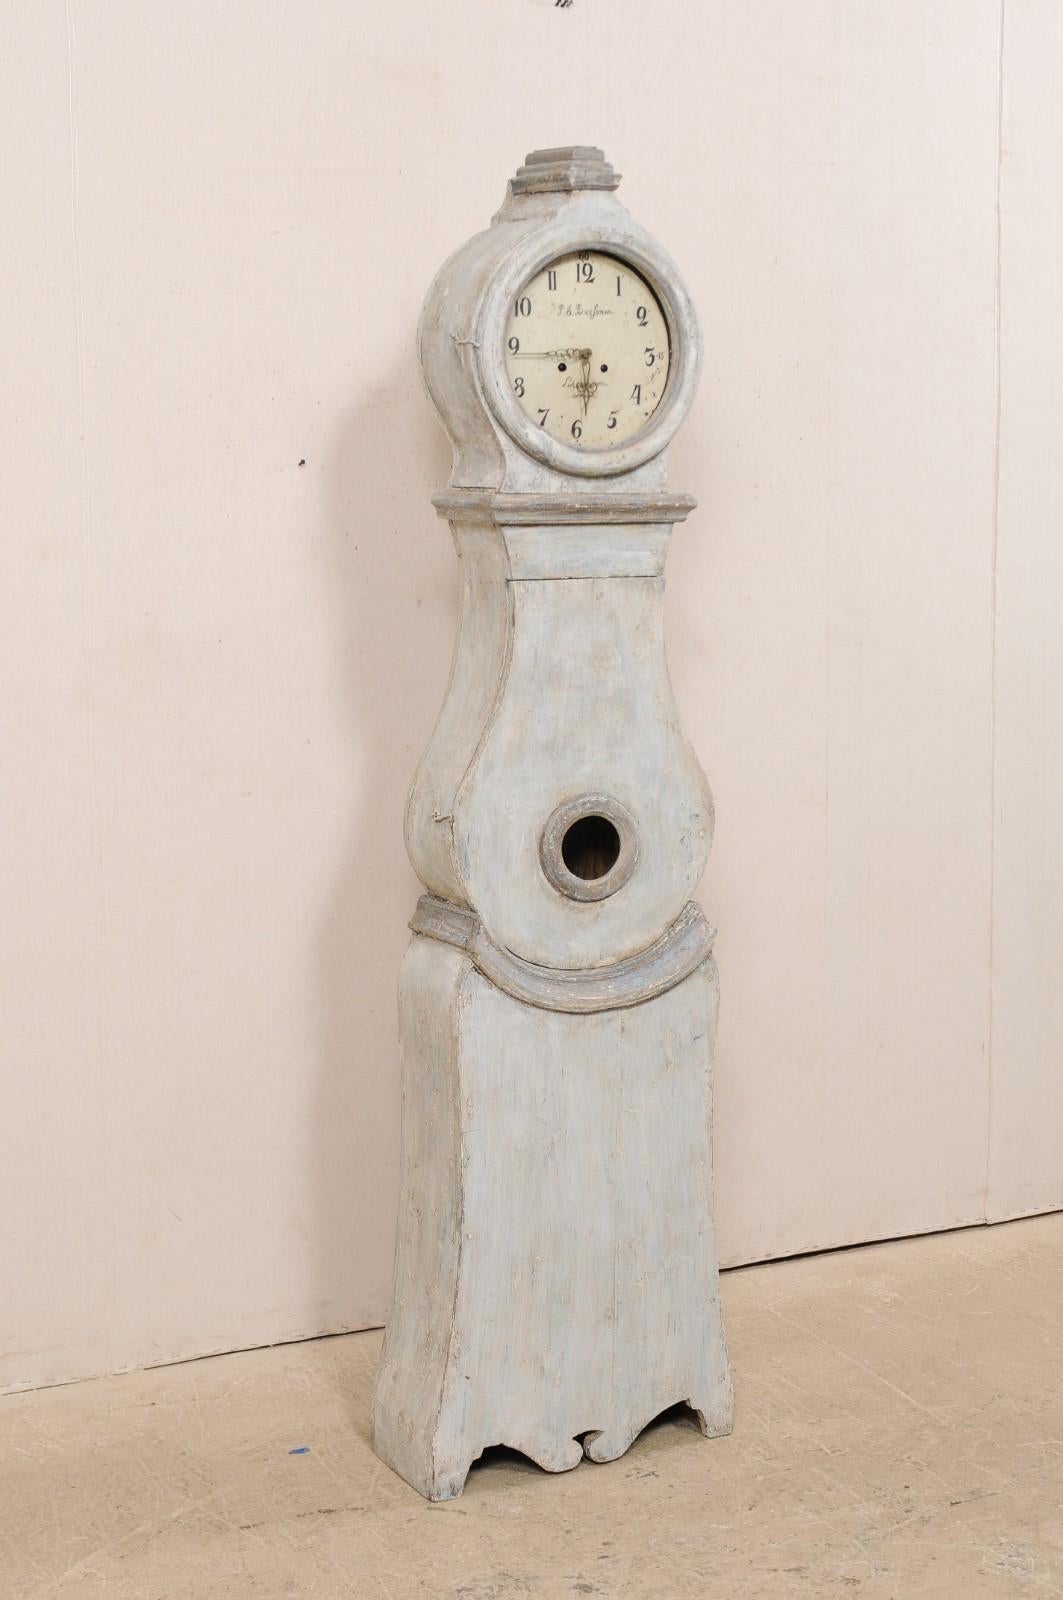 A Swedish Fryksdahl carved and painted wood floor clock from the 19th century. This antique Swedish Fryksdahl clock features a carved crown which tilts slightly forward, adorn with a central volute at arched crest. The rounded head is gives way to a